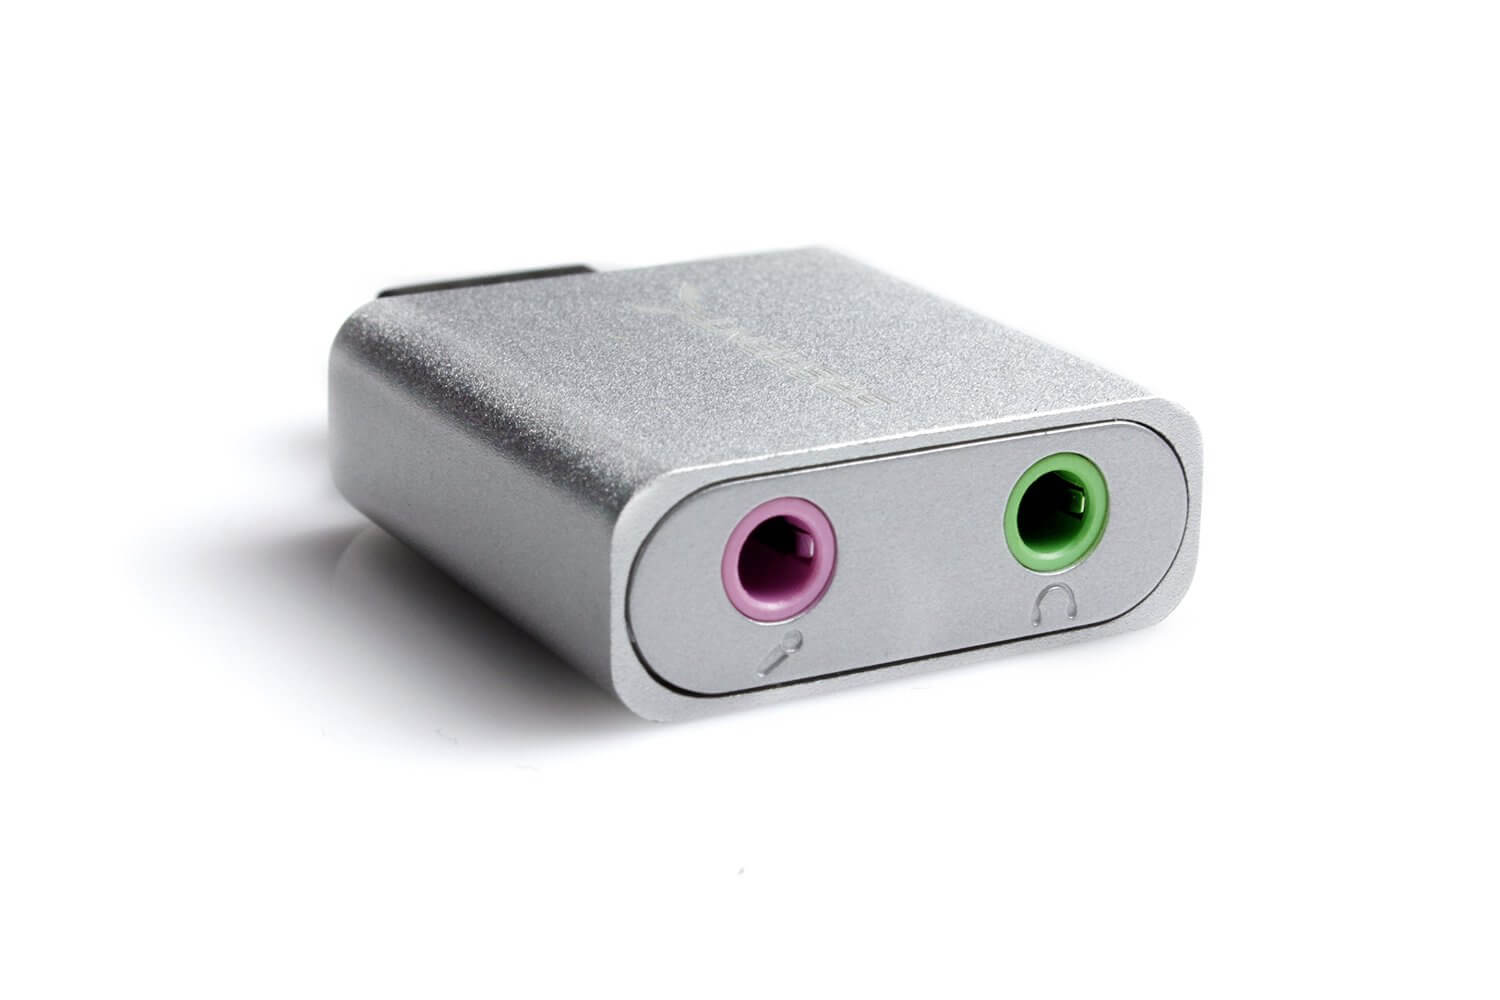 sabrent aluminum usb external stereo sound adapter for windows and mac.